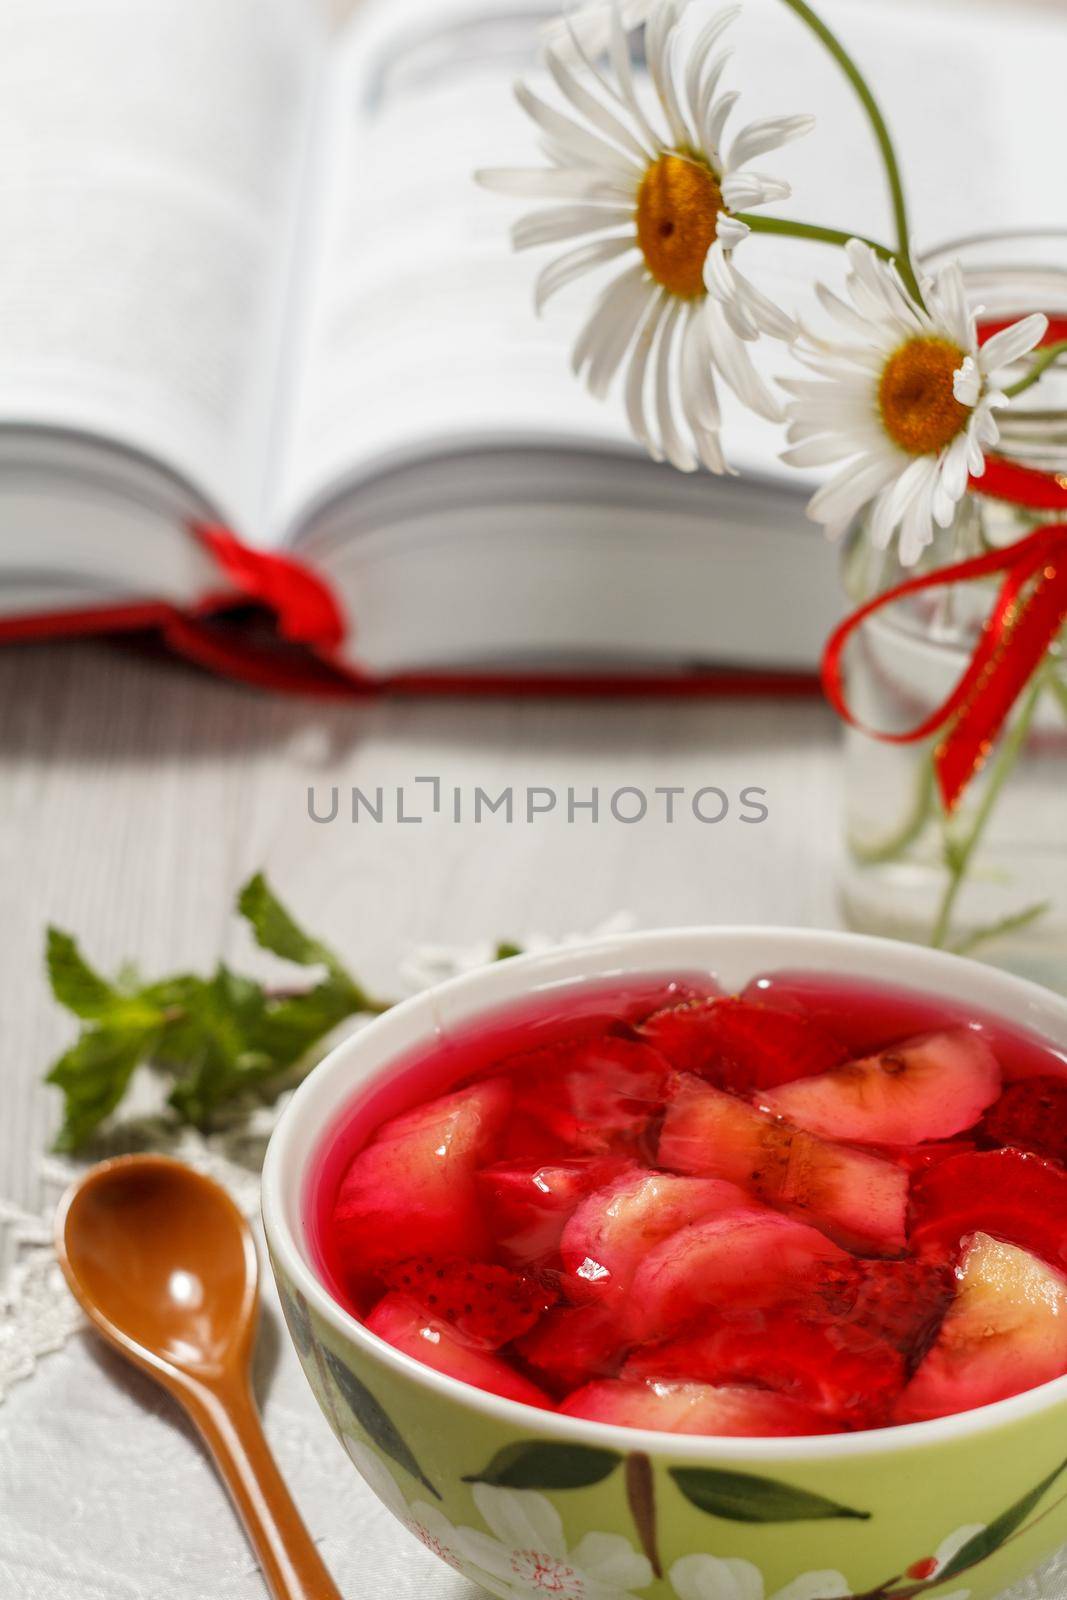 Cherry jelly with strawberry pieces in the bowl with opened book and chamomiles on the background